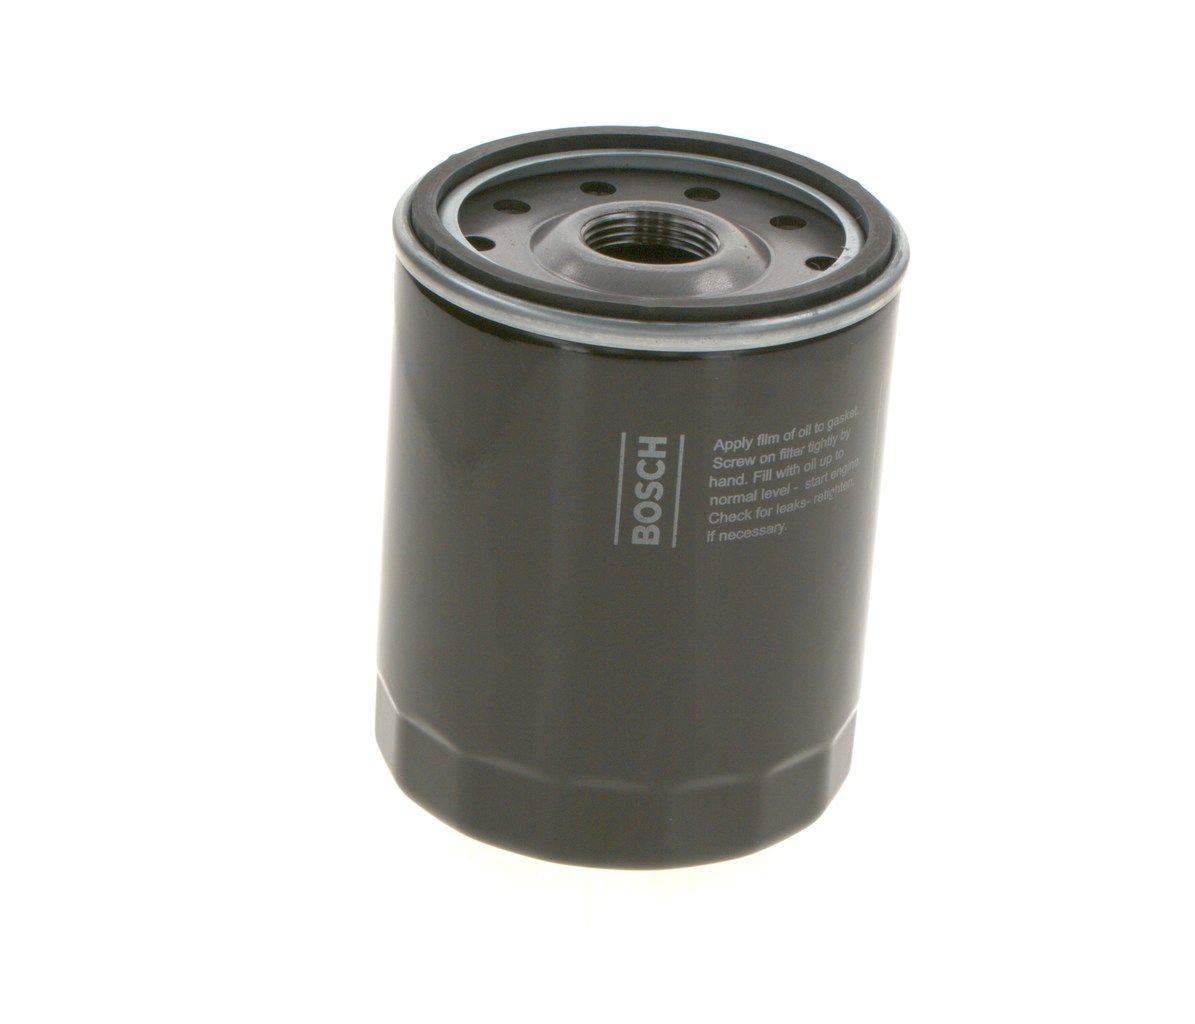 F026407263 Oil filter P 7263 BOSCH M 30 x 2, with one anti-return valve, Spin-on Filter